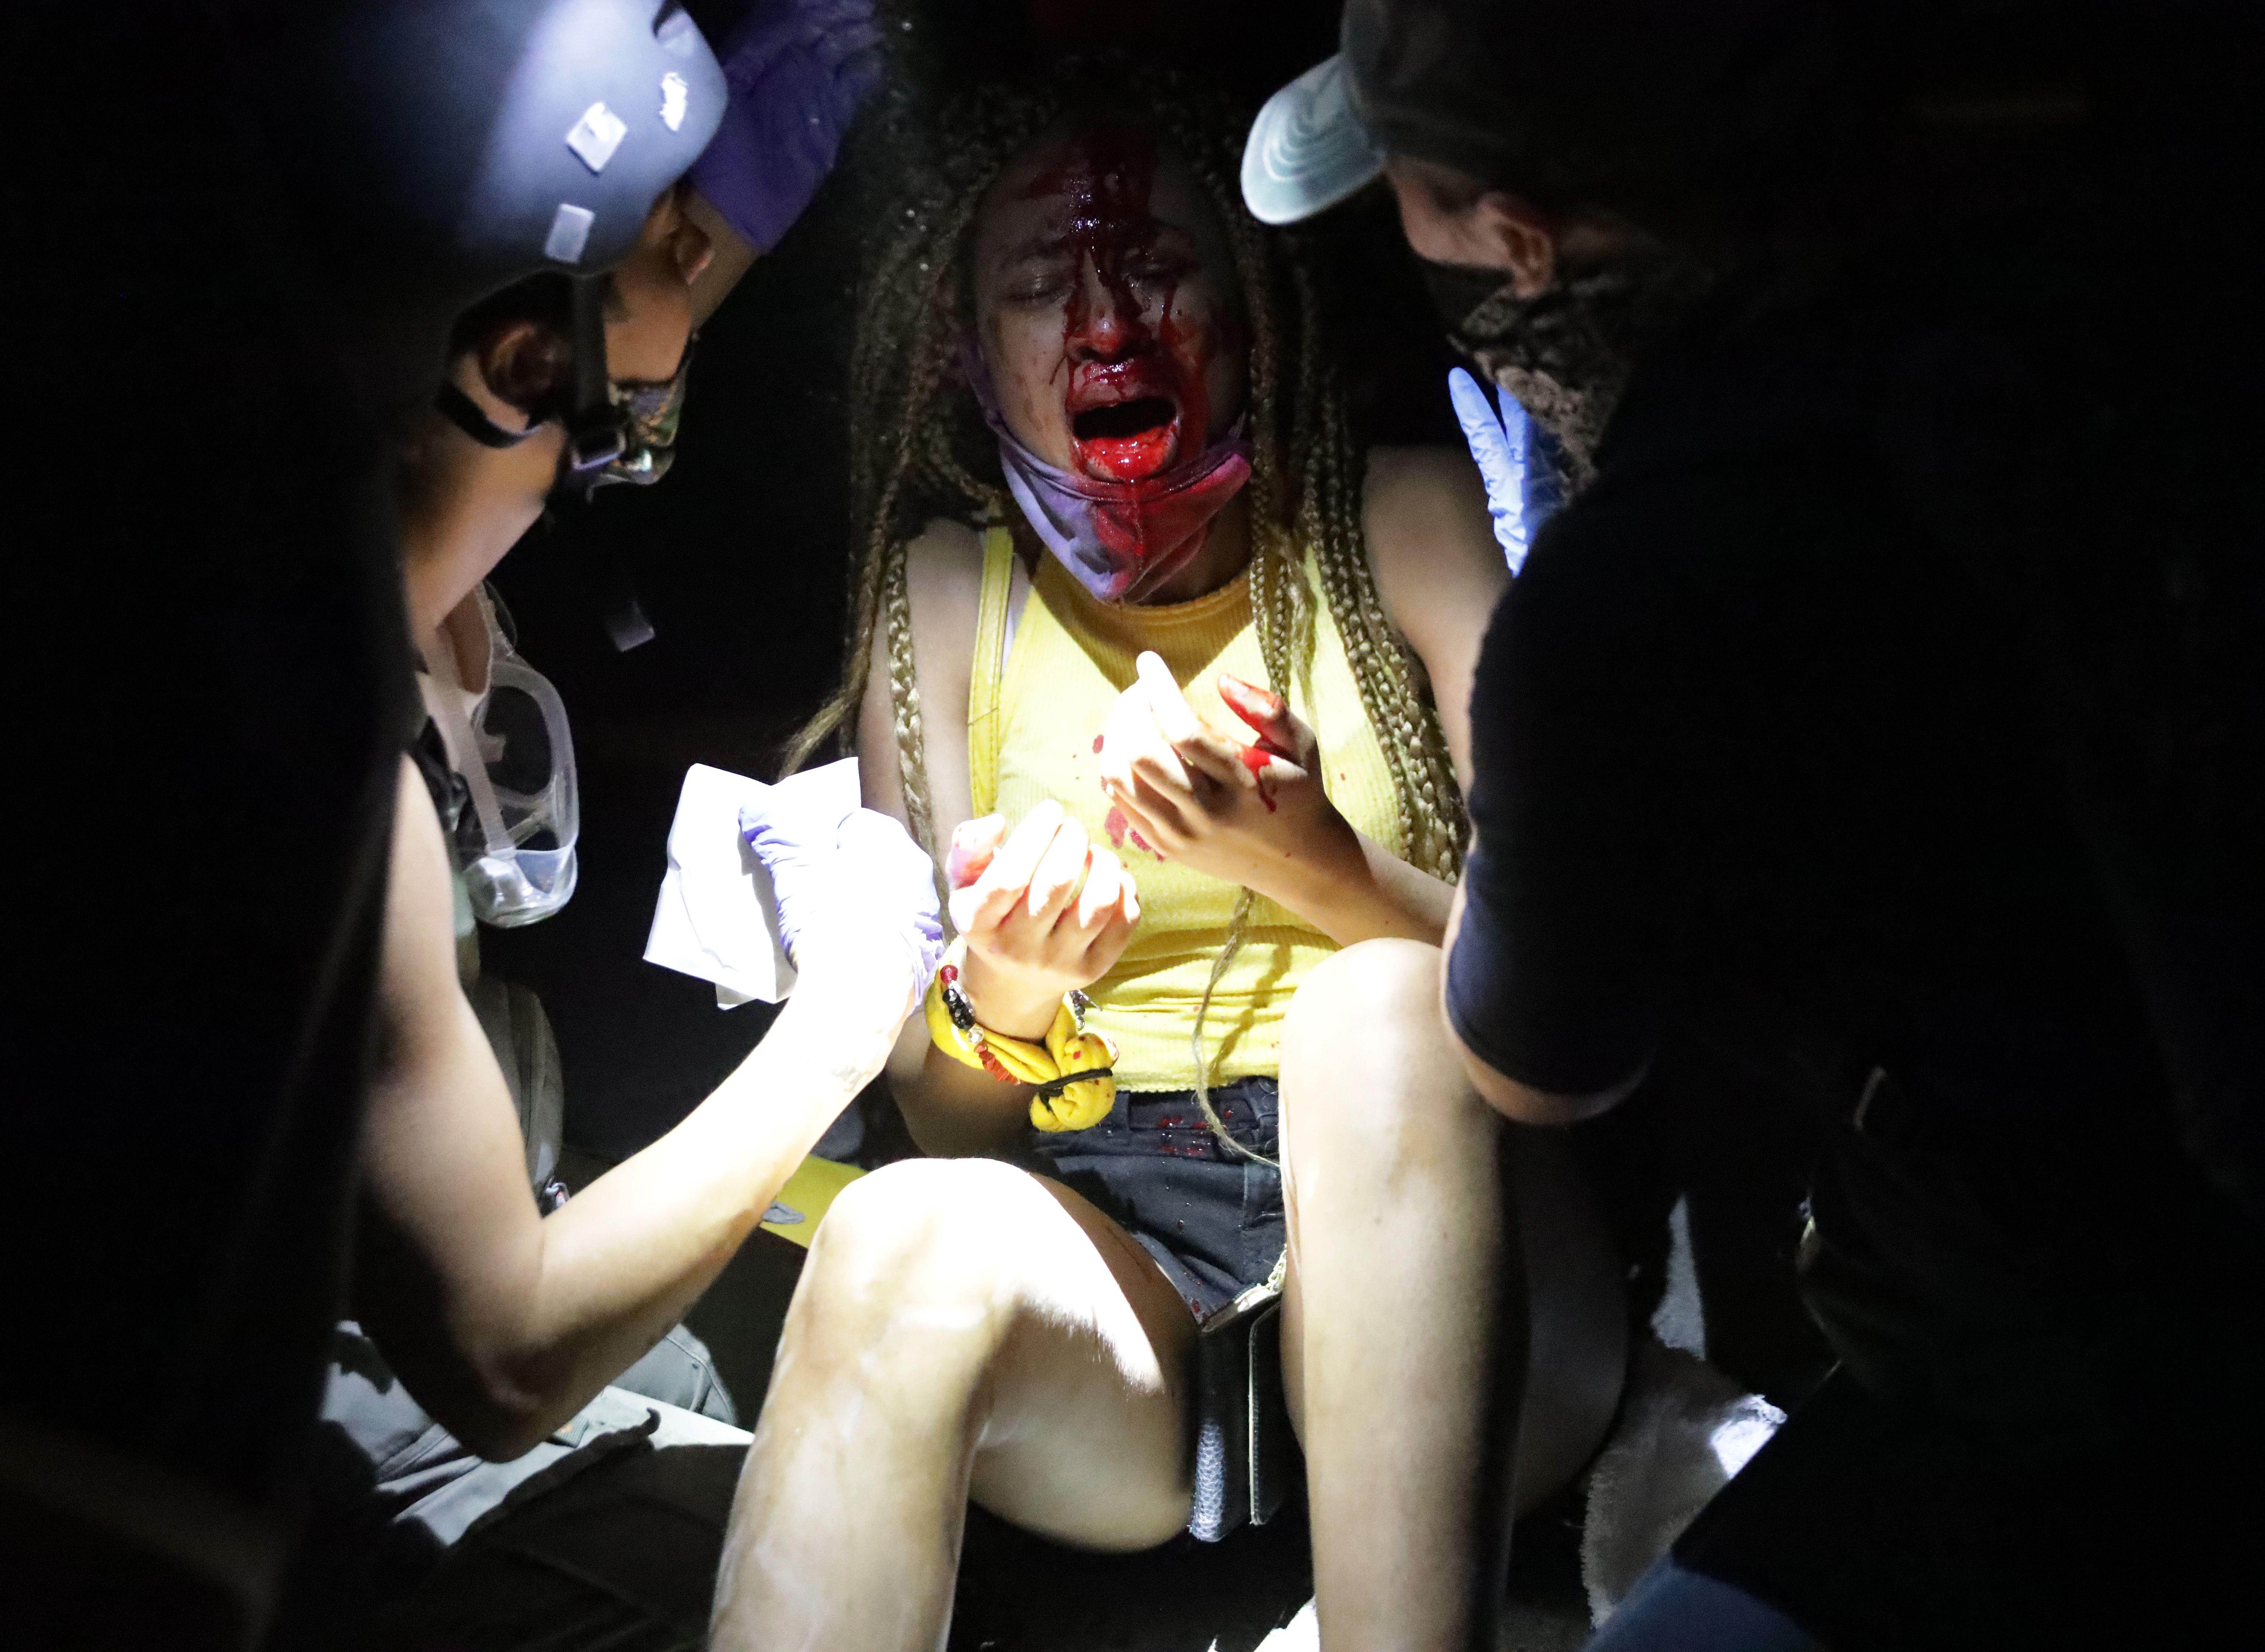 An injured women is tended to near the White House